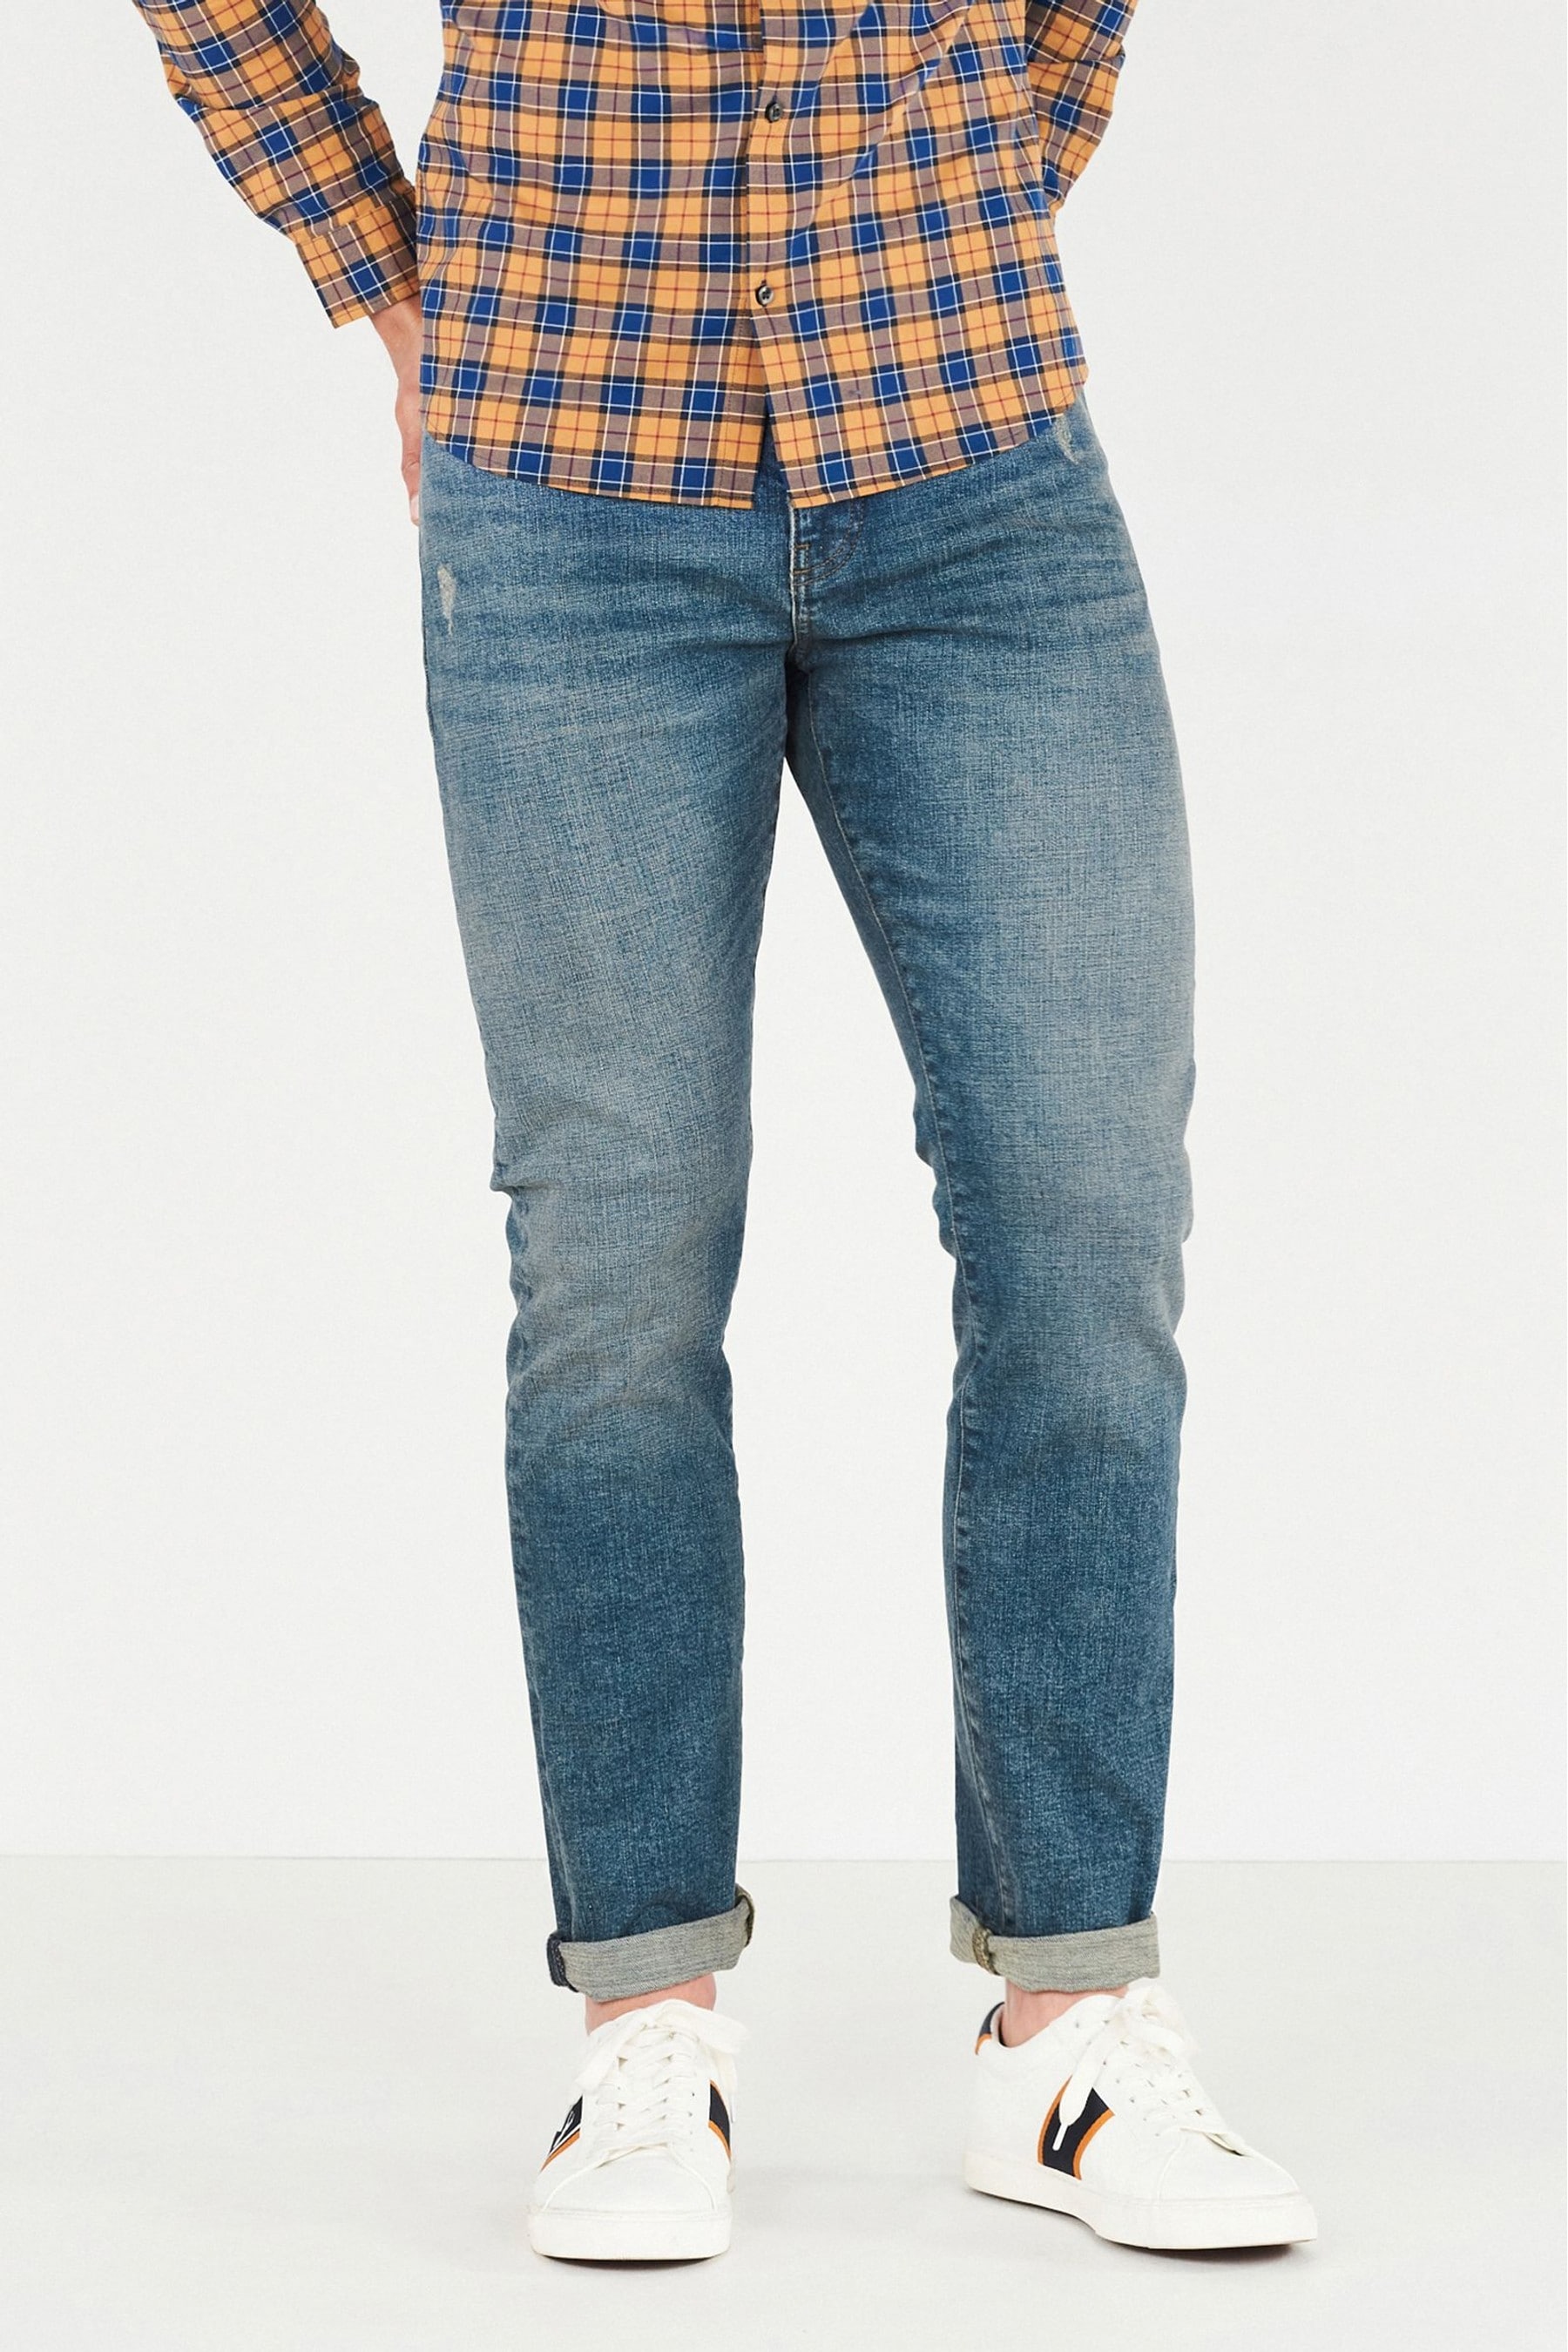 Nextdirect belted jeans